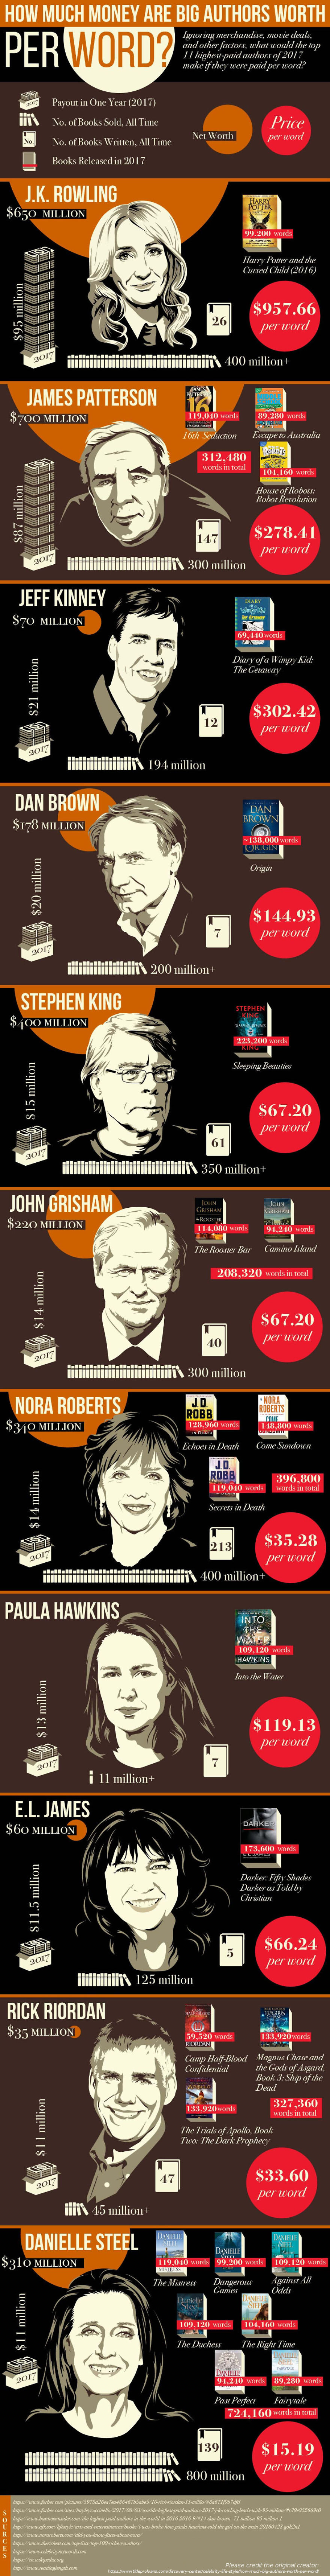 How Much Money Would Big Authors Make If They Were Paid Per Word? (Visualization)